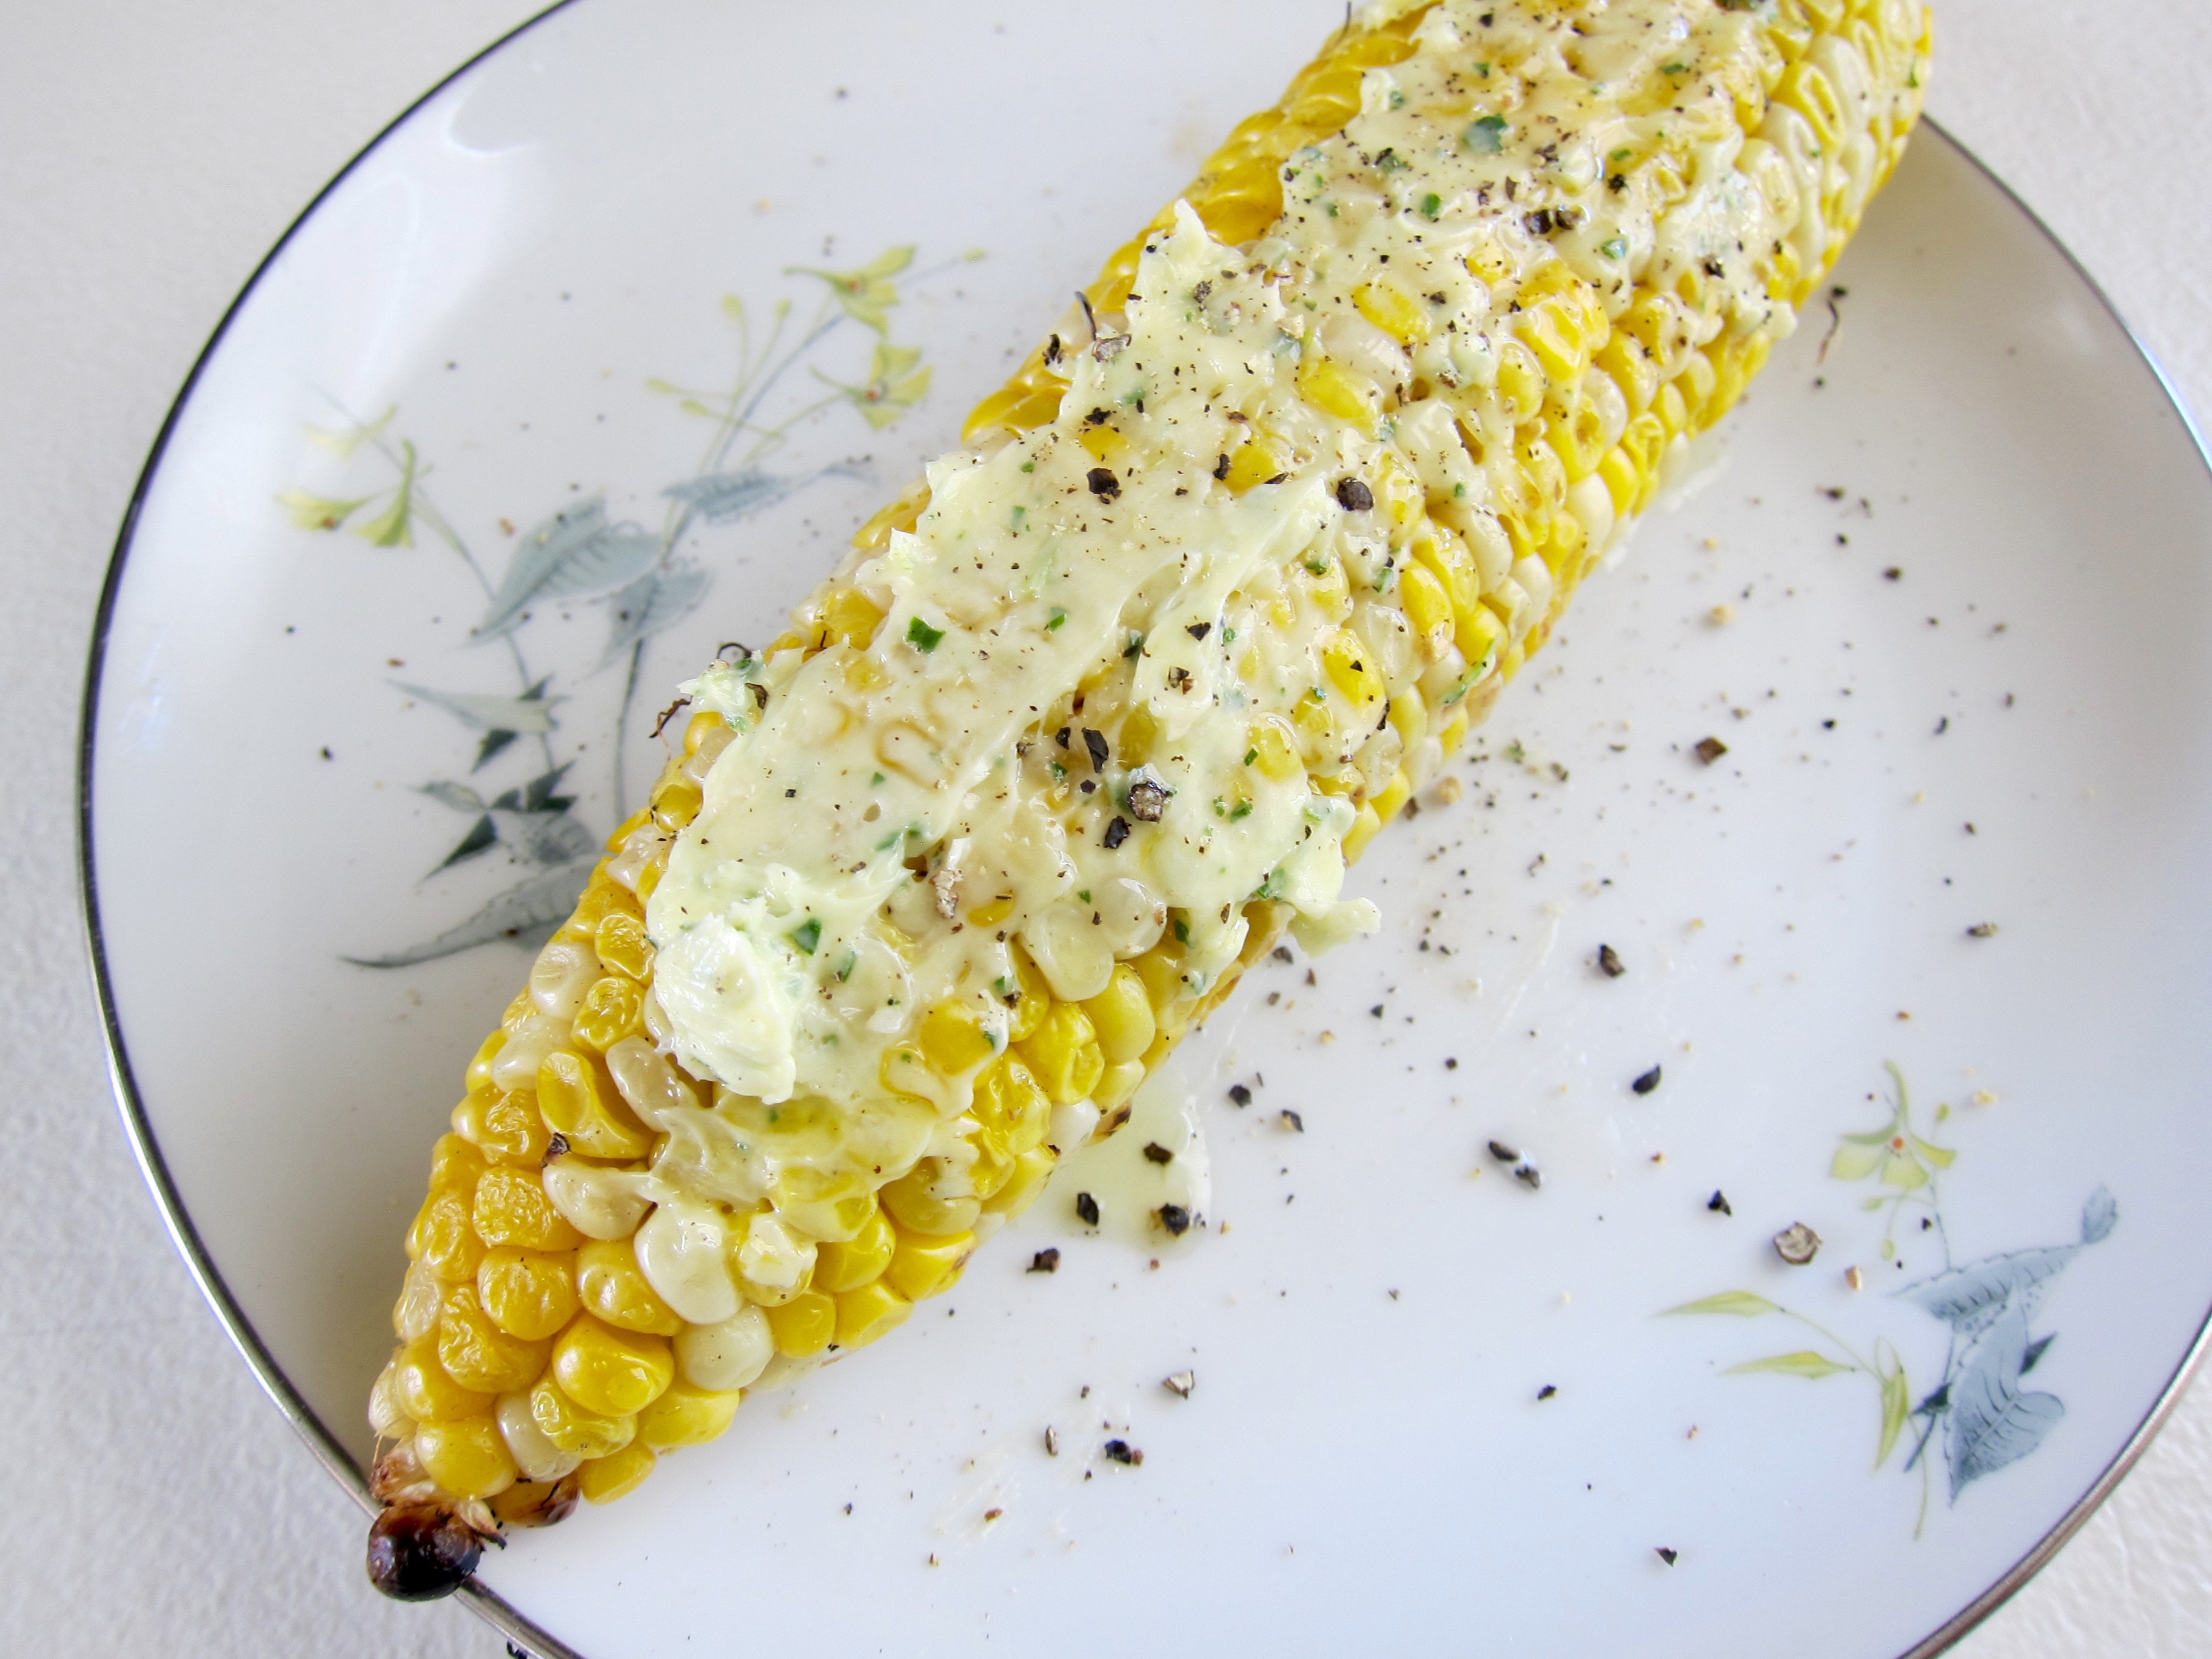 Herbed butter with fresh oregano and garlic tastes delicious on grilled corn.